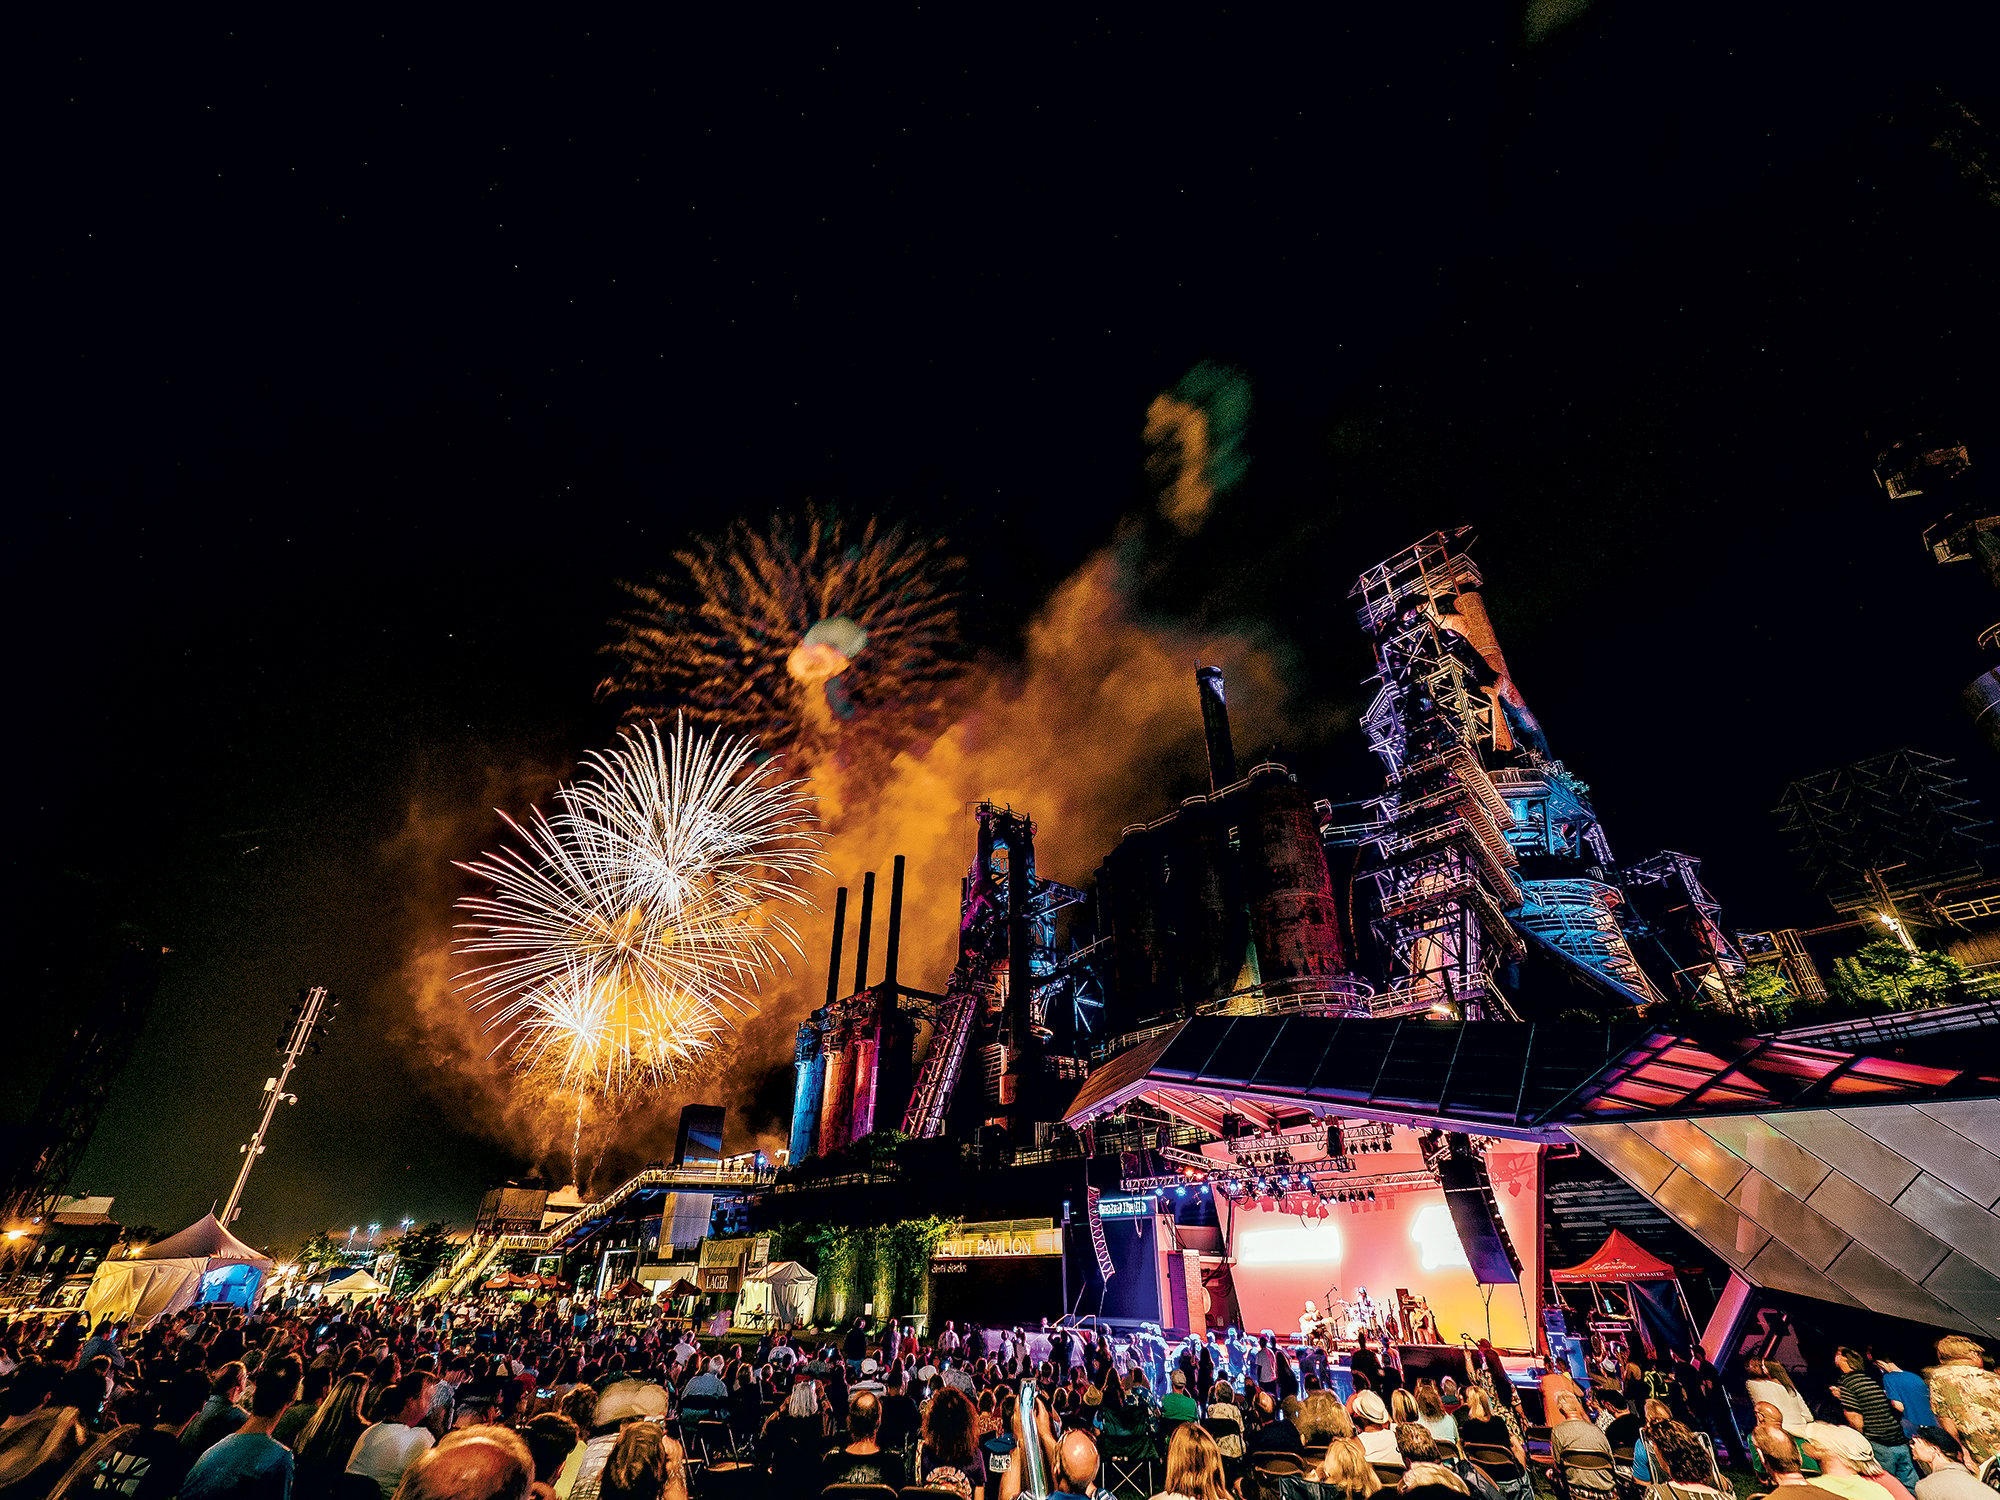 After 11 days and 500 acts, the festival goes out with a bang. Photograph by Ted Colegrove.